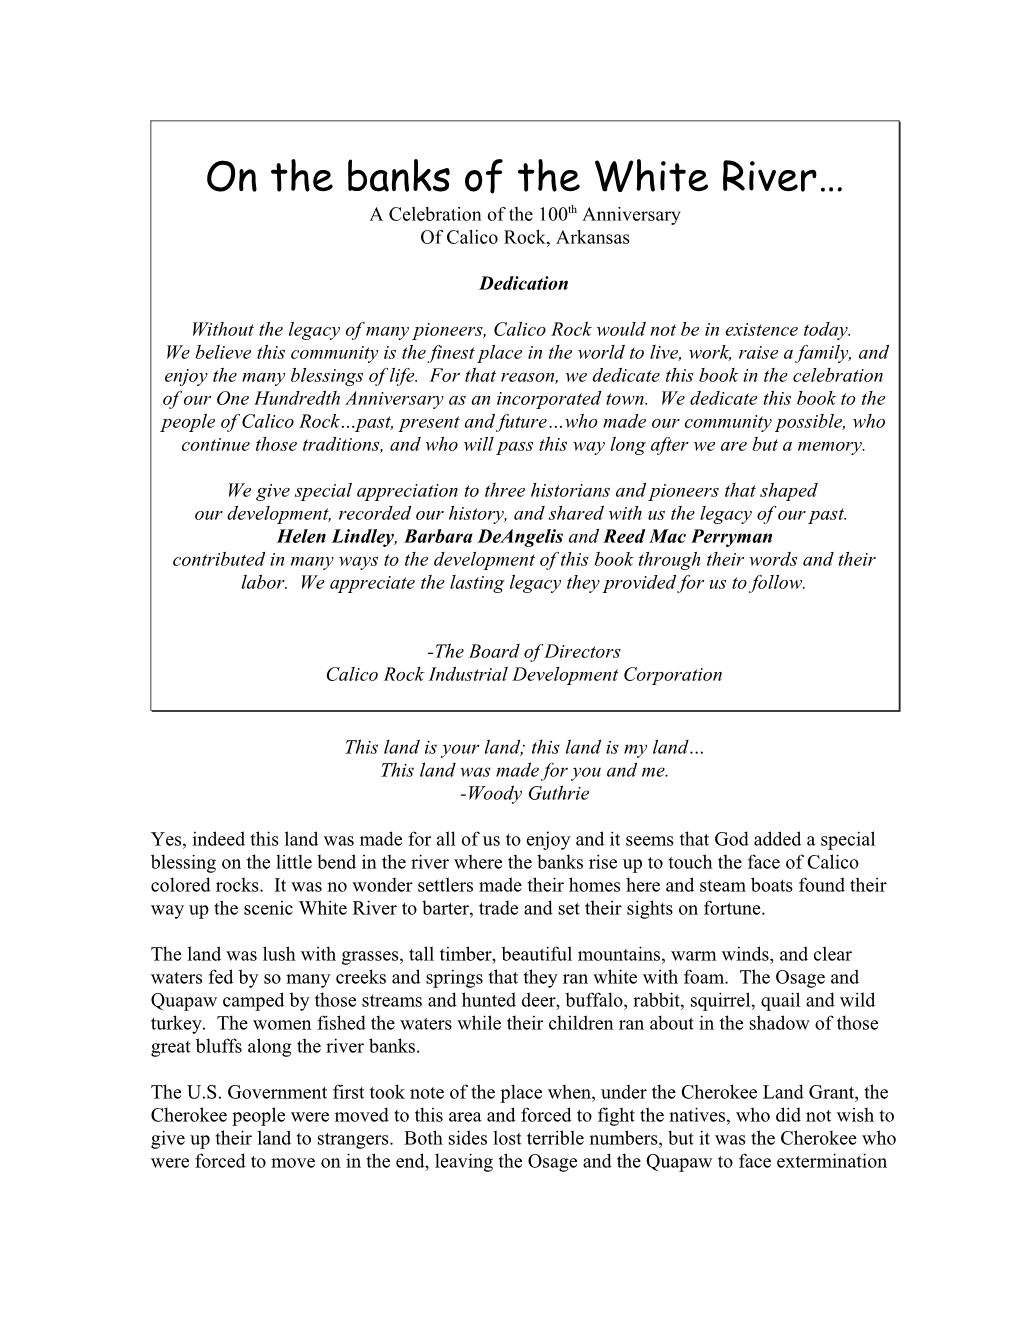 It All Happened on the Banks of the White River